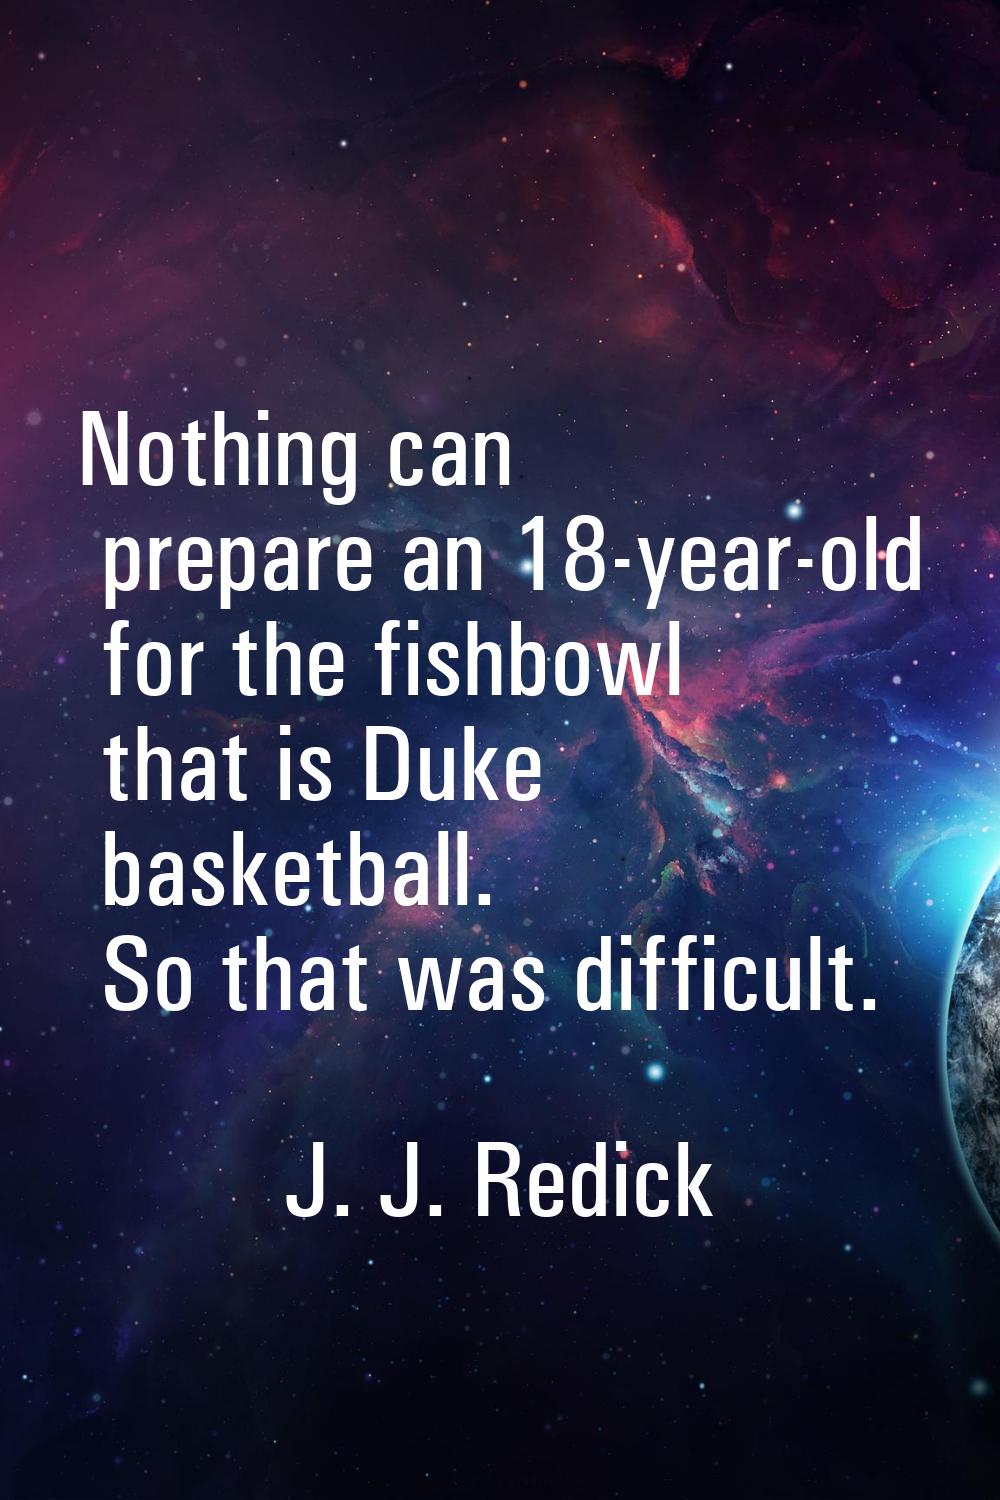 Nothing can prepare an 18-year-old for the fishbowl that is Duke basketball. So that was difficult.